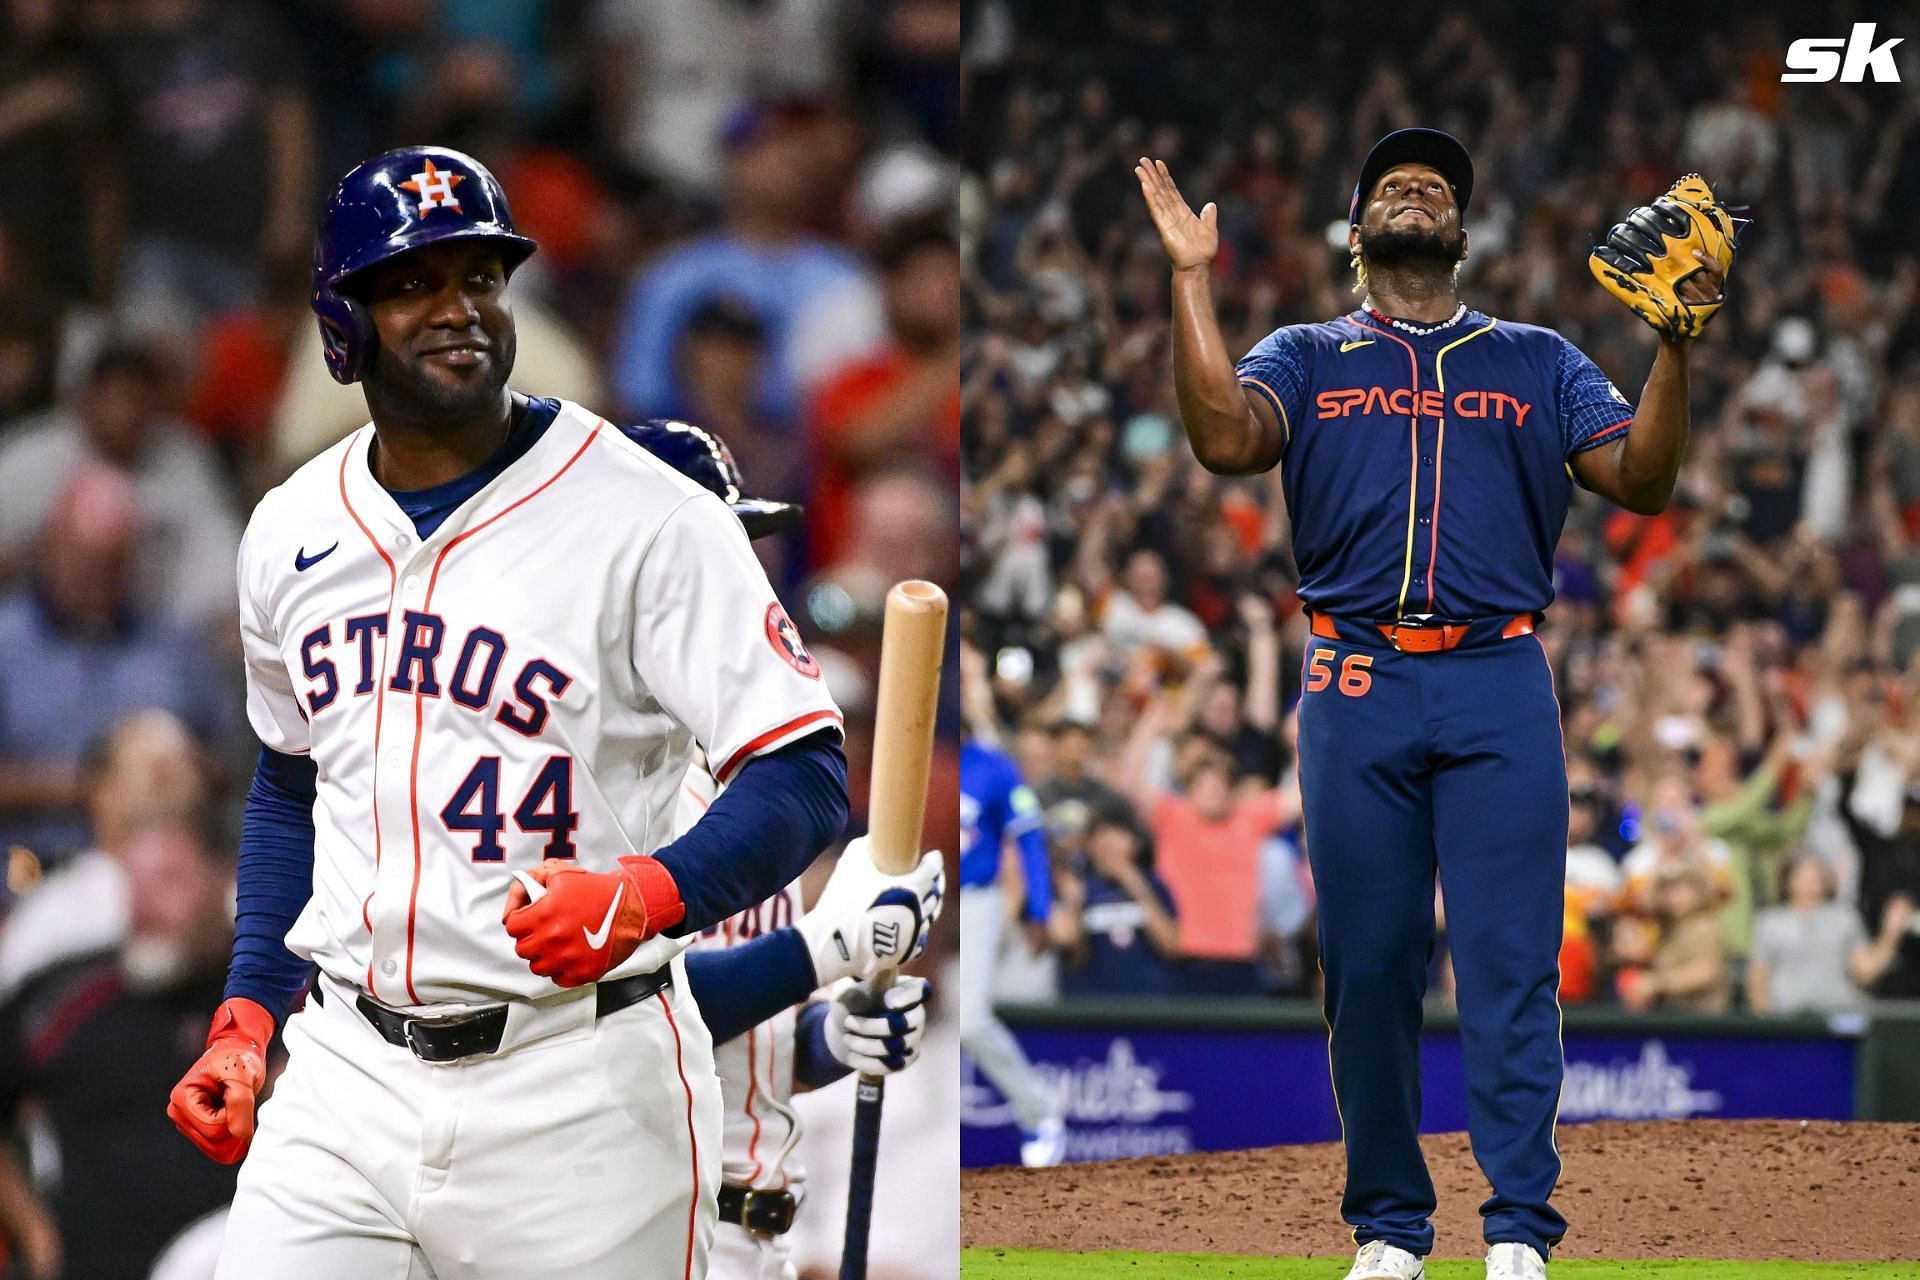  Astros fans relieved after team